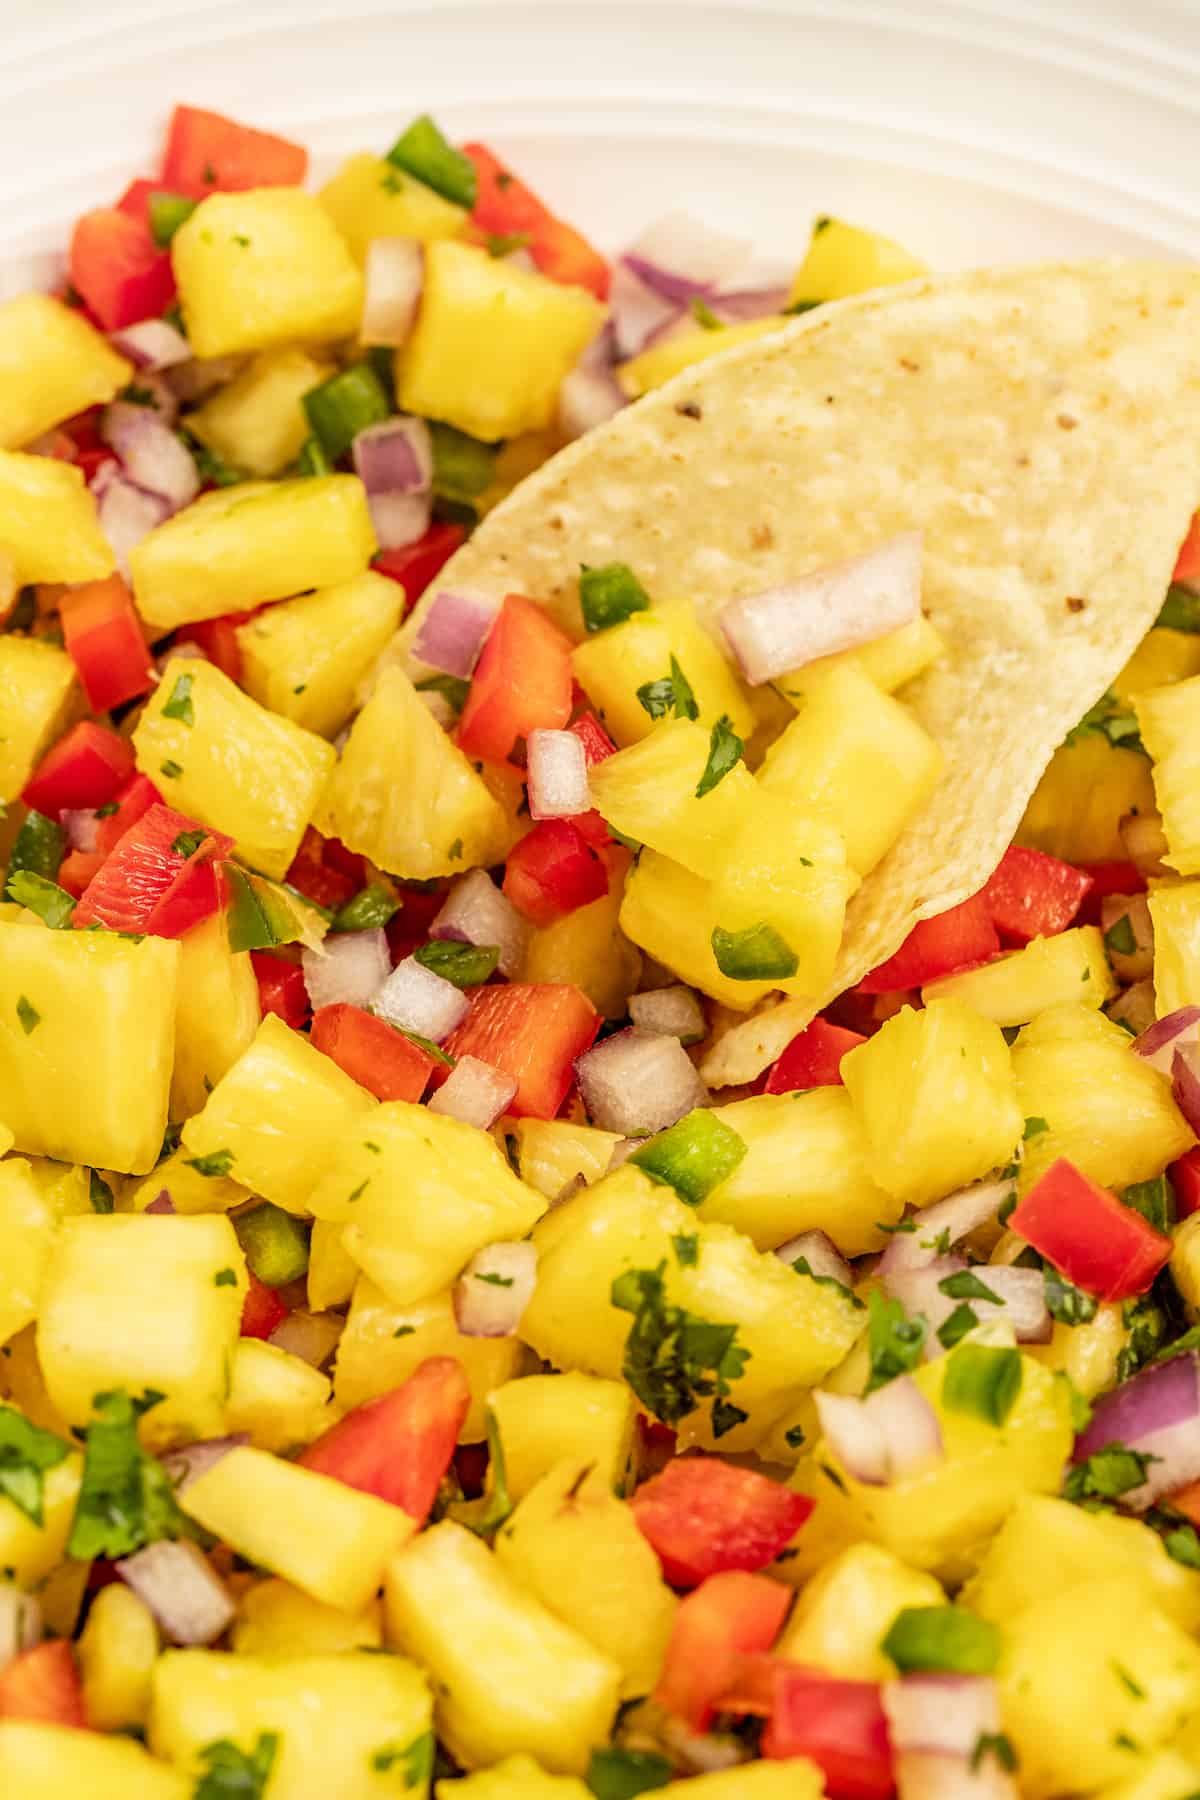 Dipping a corn chip into the pineapple salsa.